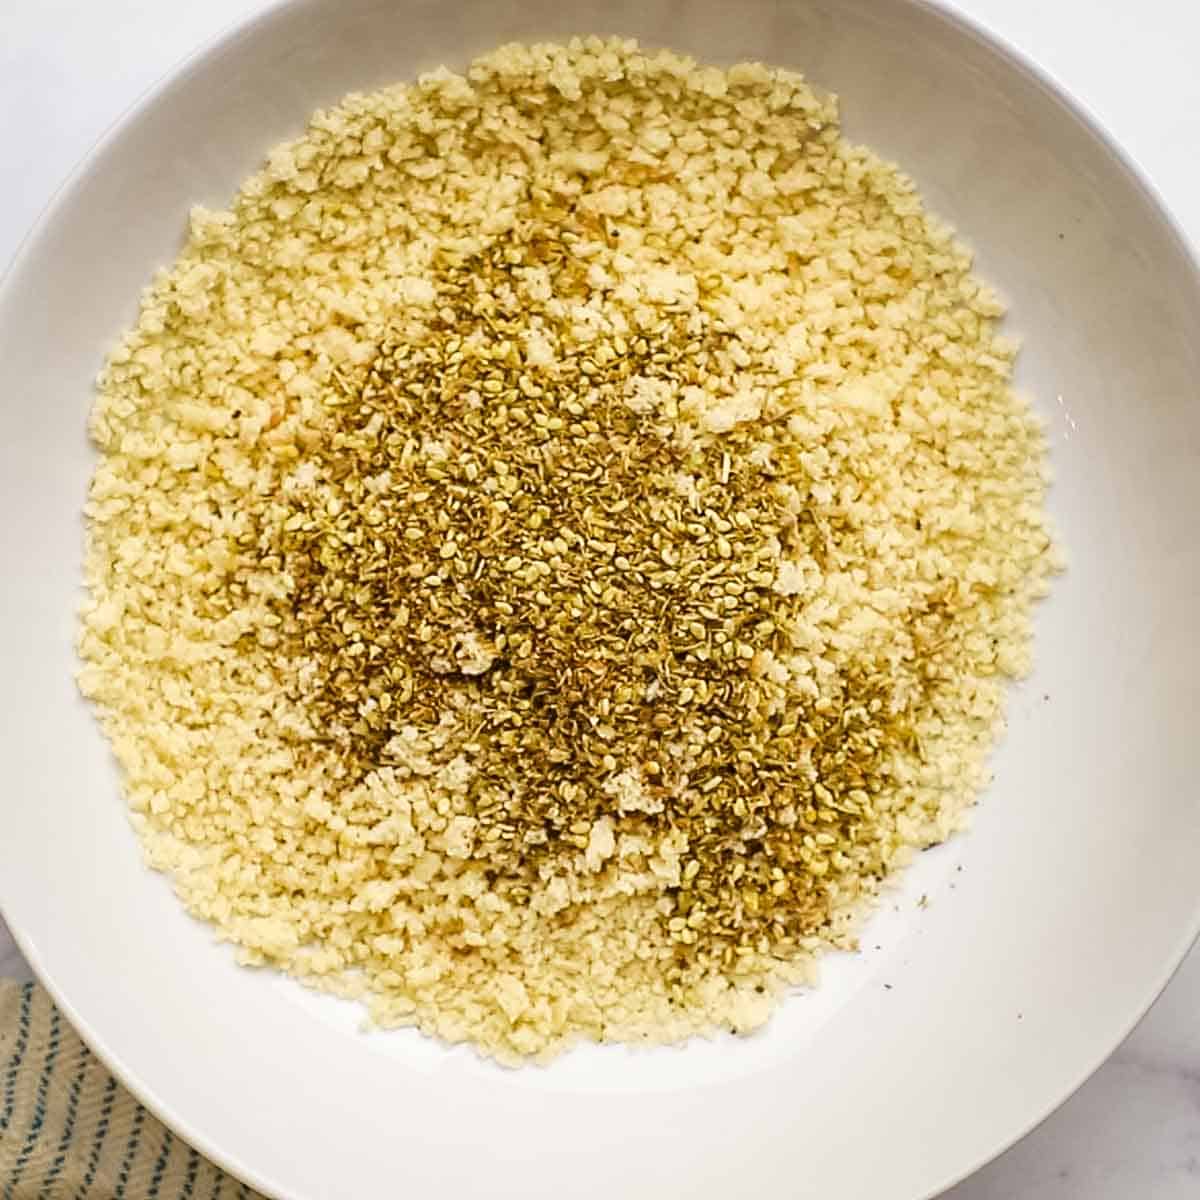 panko bread crumbs and zaatar in a bowl